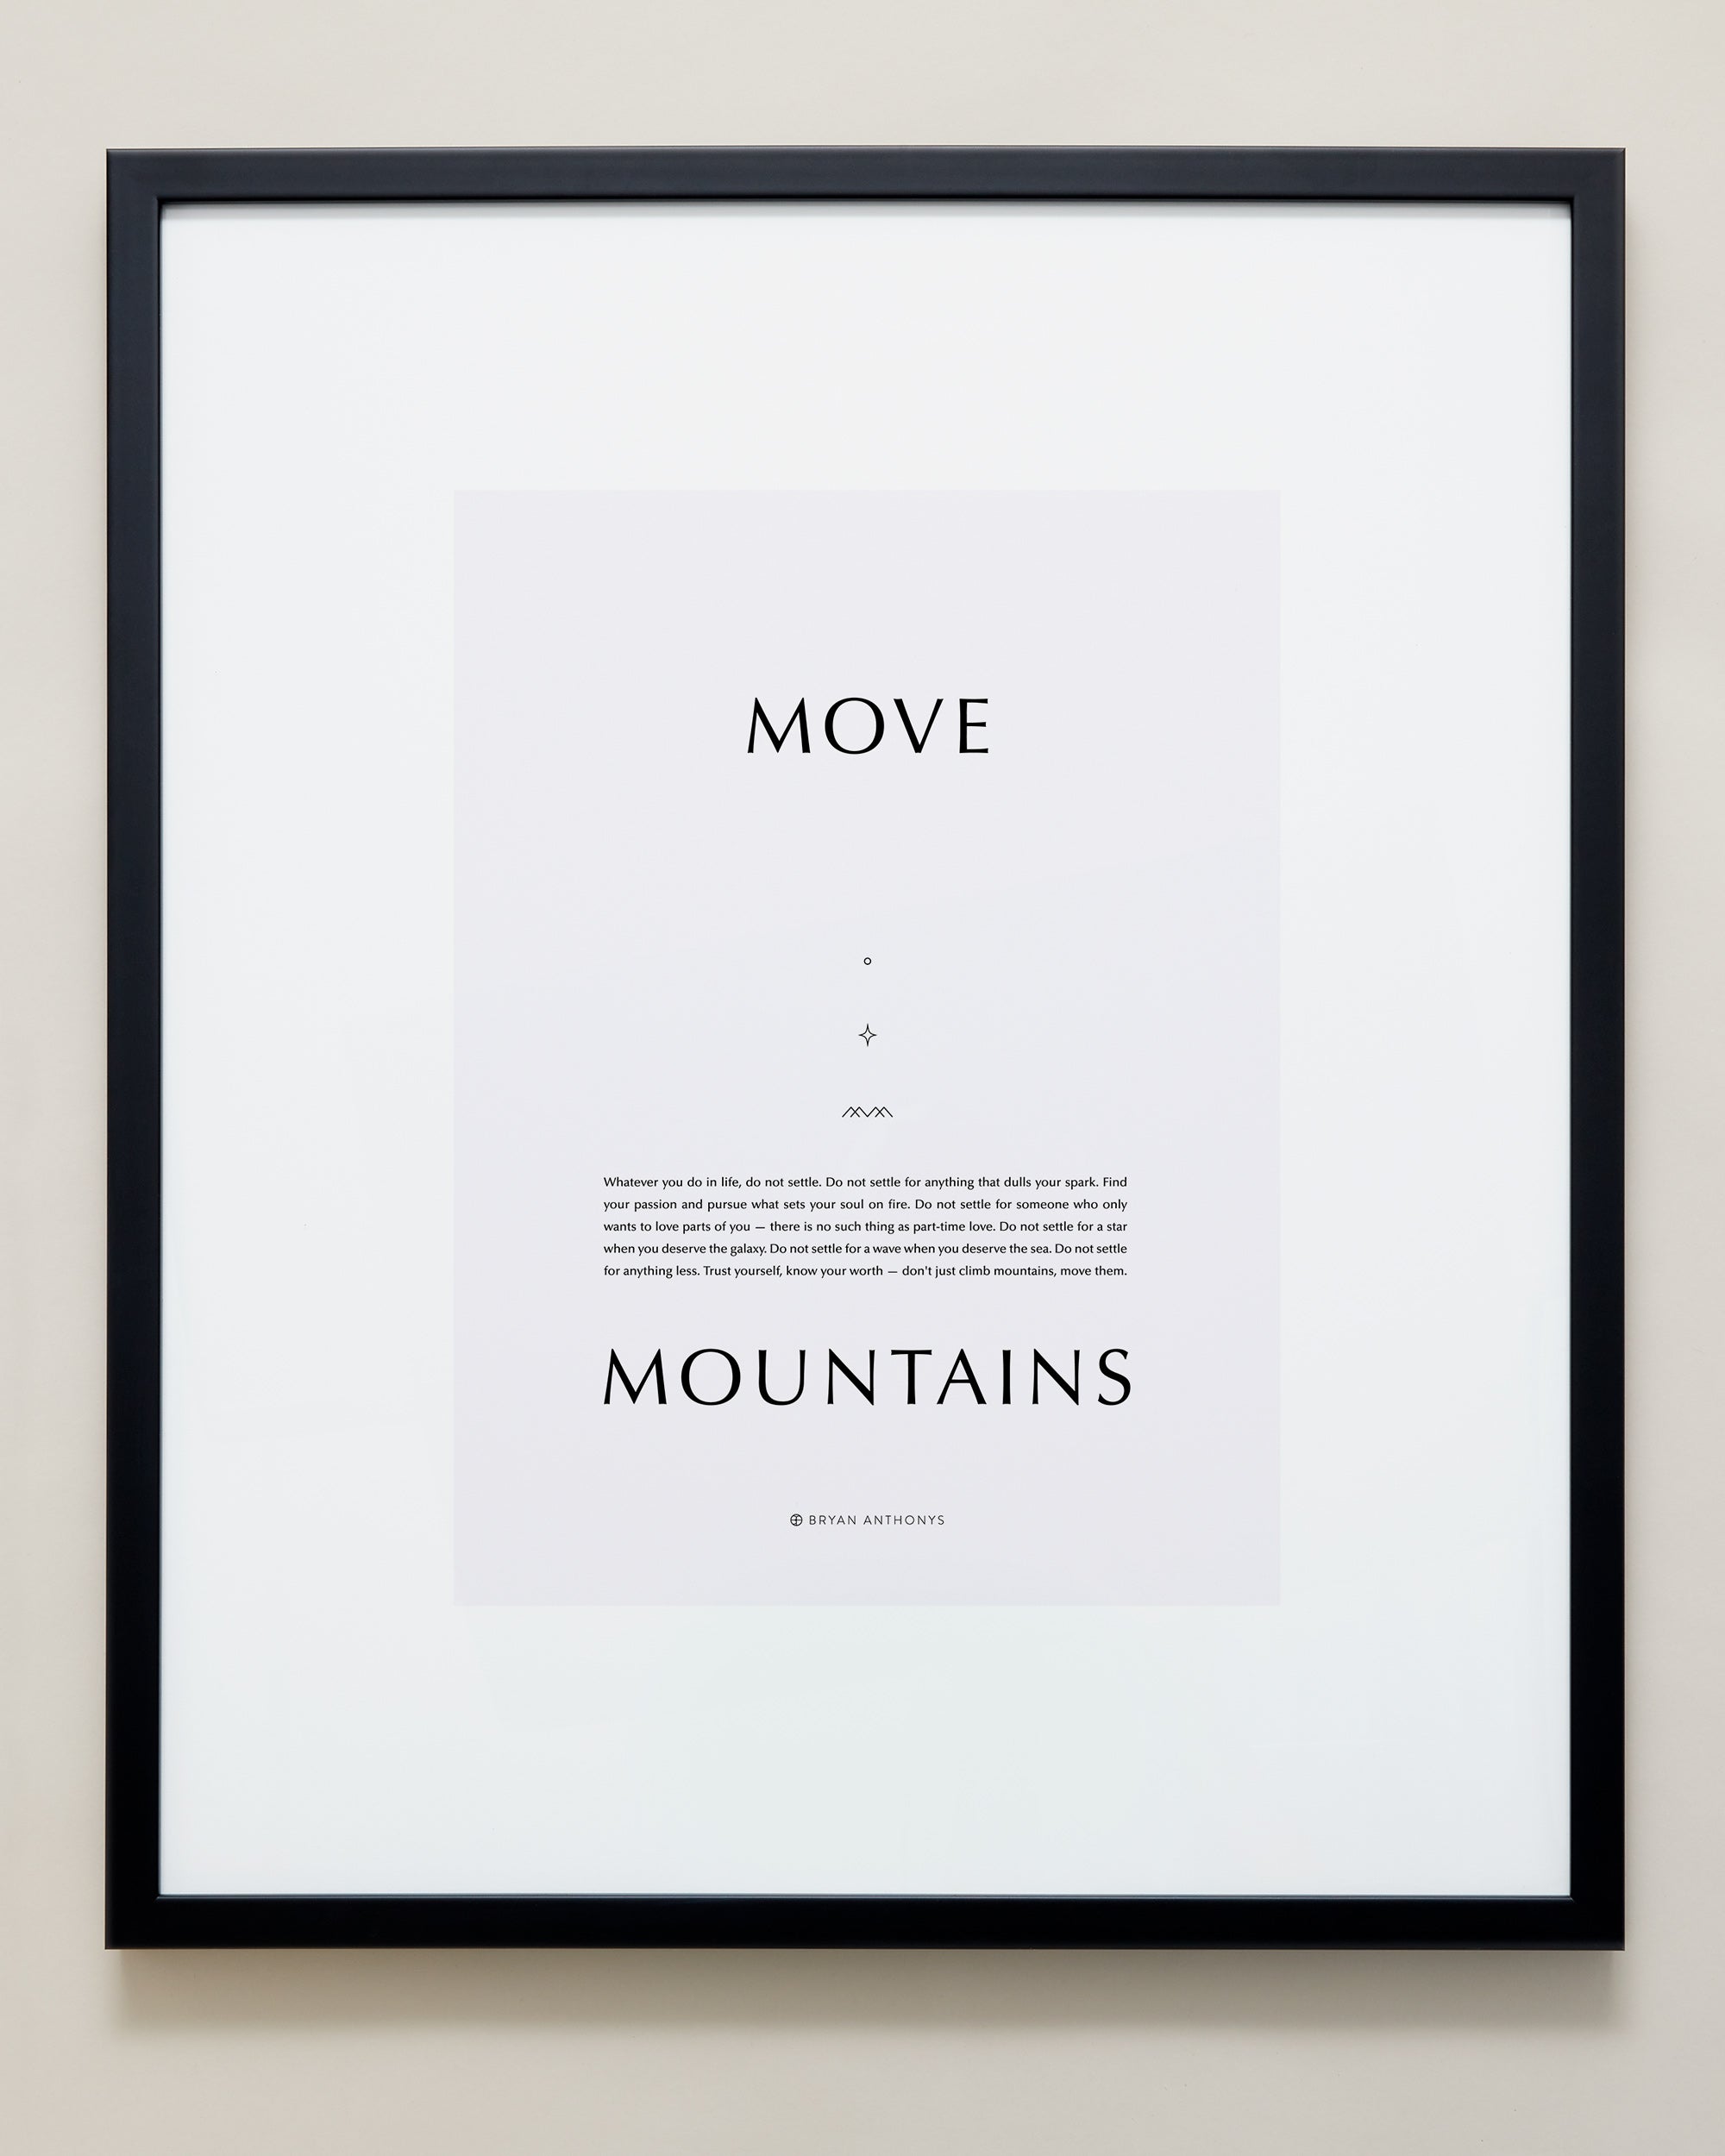 Bryan Anthonys Home Decor Purposeful Prints Move Mountains Iconic Framed Print Gray Art With Black Frame 20x24